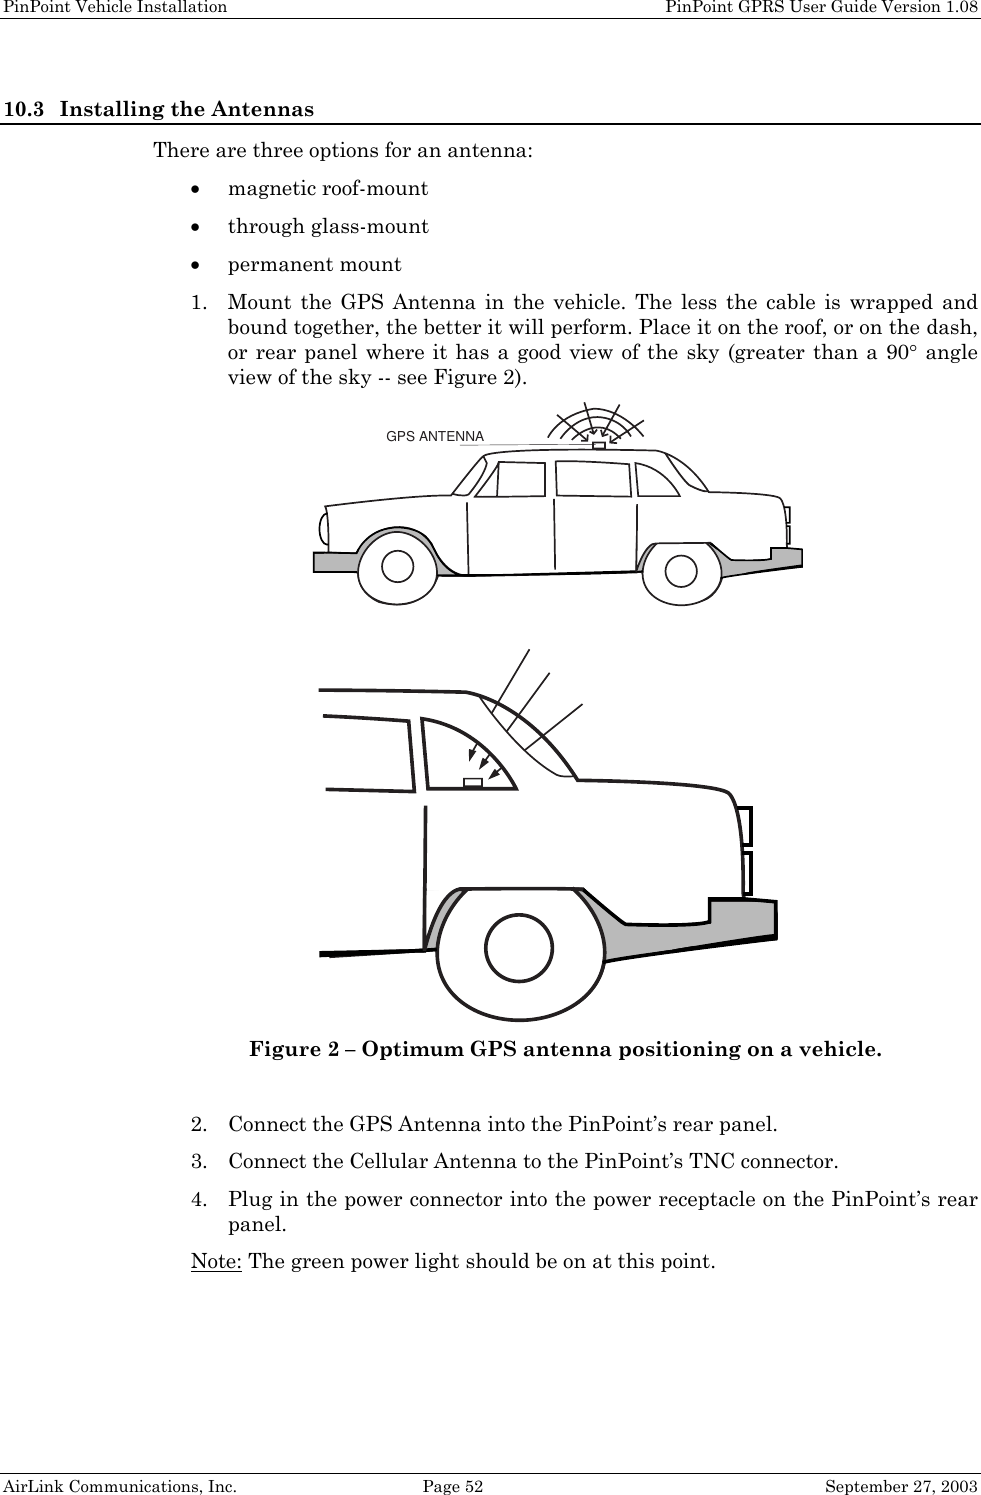 PinPoint Vehicle Installation    PinPoint GPRS User Guide Version 1.08 AirLink Communications, Inc.  Page 52  September 27, 2003 10.3 Installing the Antennas There are three options for an antenna: • magnetic roof-mount • through glass-mount • permanent mount 1. Mount the GPS Antenna in the vehicle. The less the cable is wrapped and bound together, the better it will perform. Place it on the roof, or on the dash, or rear panel where it has a good view of the sky (greater than a 90° angle view of the sky -- see Figure 2). GPS ANTENNA Figure 2 – Optimum GPS antenna positioning on a vehicle.  2. Connect the GPS Antenna into the PinPoint’s rear panel. 3. Connect the Cellular Antenna to the PinPoint’s TNC connector. 4. Plug in the power connector into the power receptacle on the PinPoint’s rear panel. Note: The green power light should be on at this point.  